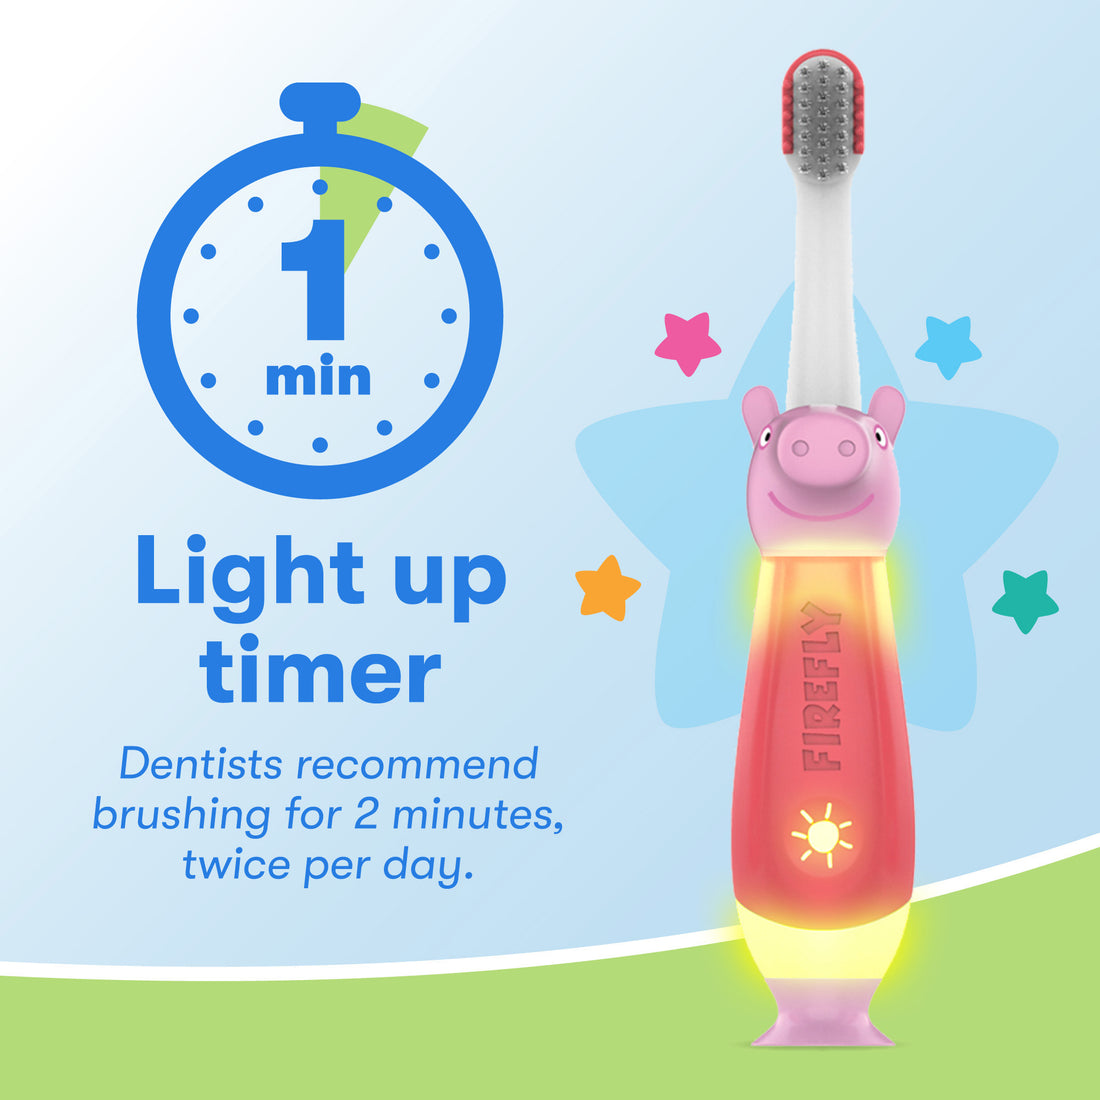 First Firefly Peppa Pig Light Up Timer Toothbrush with Extra Soft Bristles